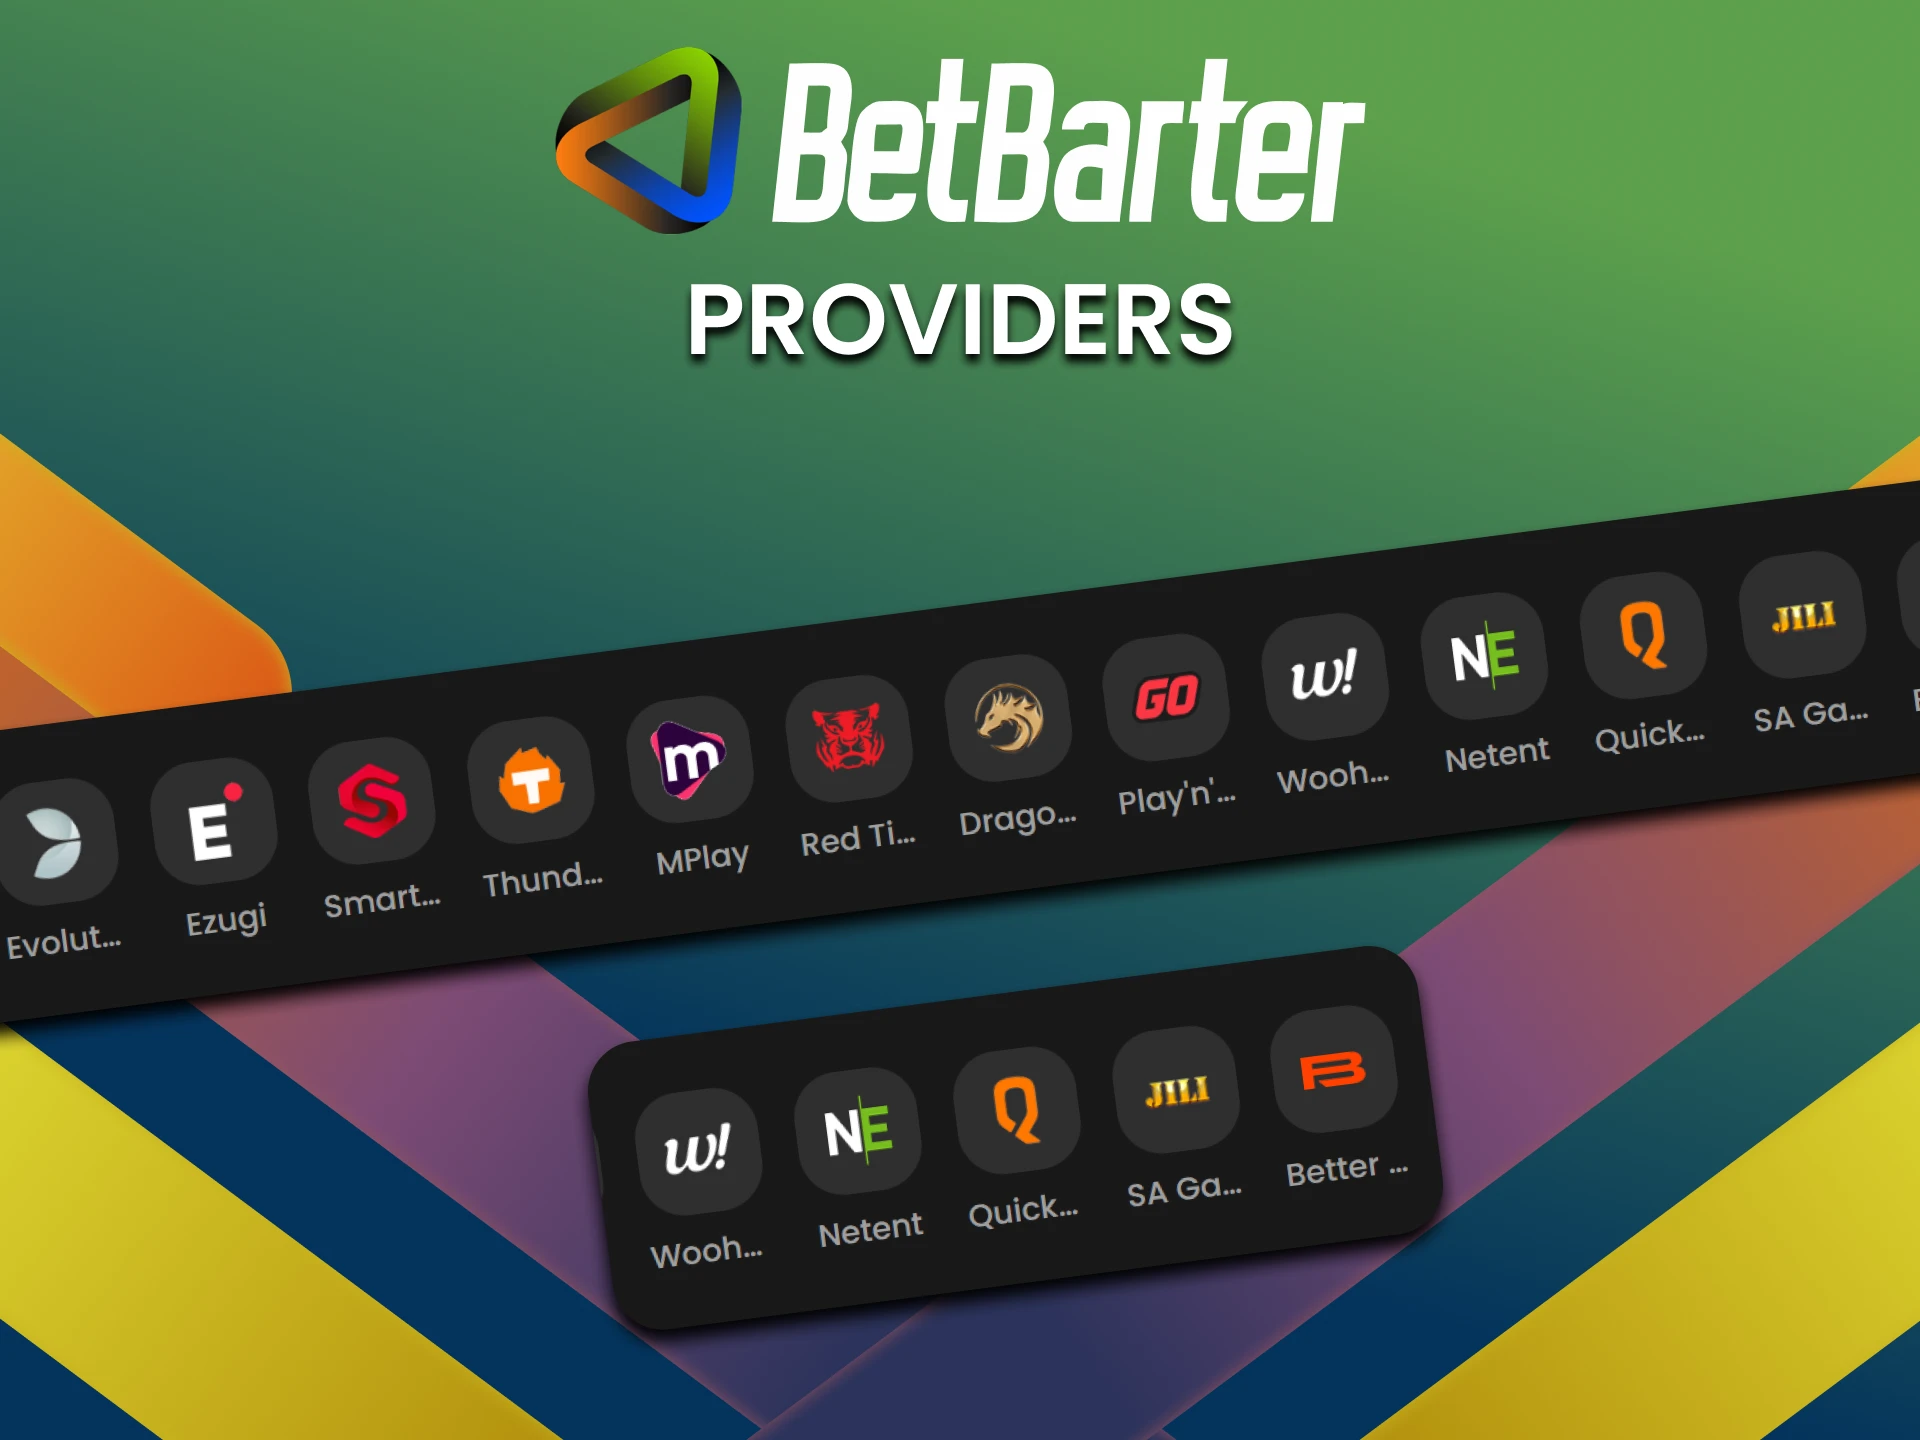 Only cool game developers are waiting for you, you will only get a pleasant experience from the casino app BetBarter.